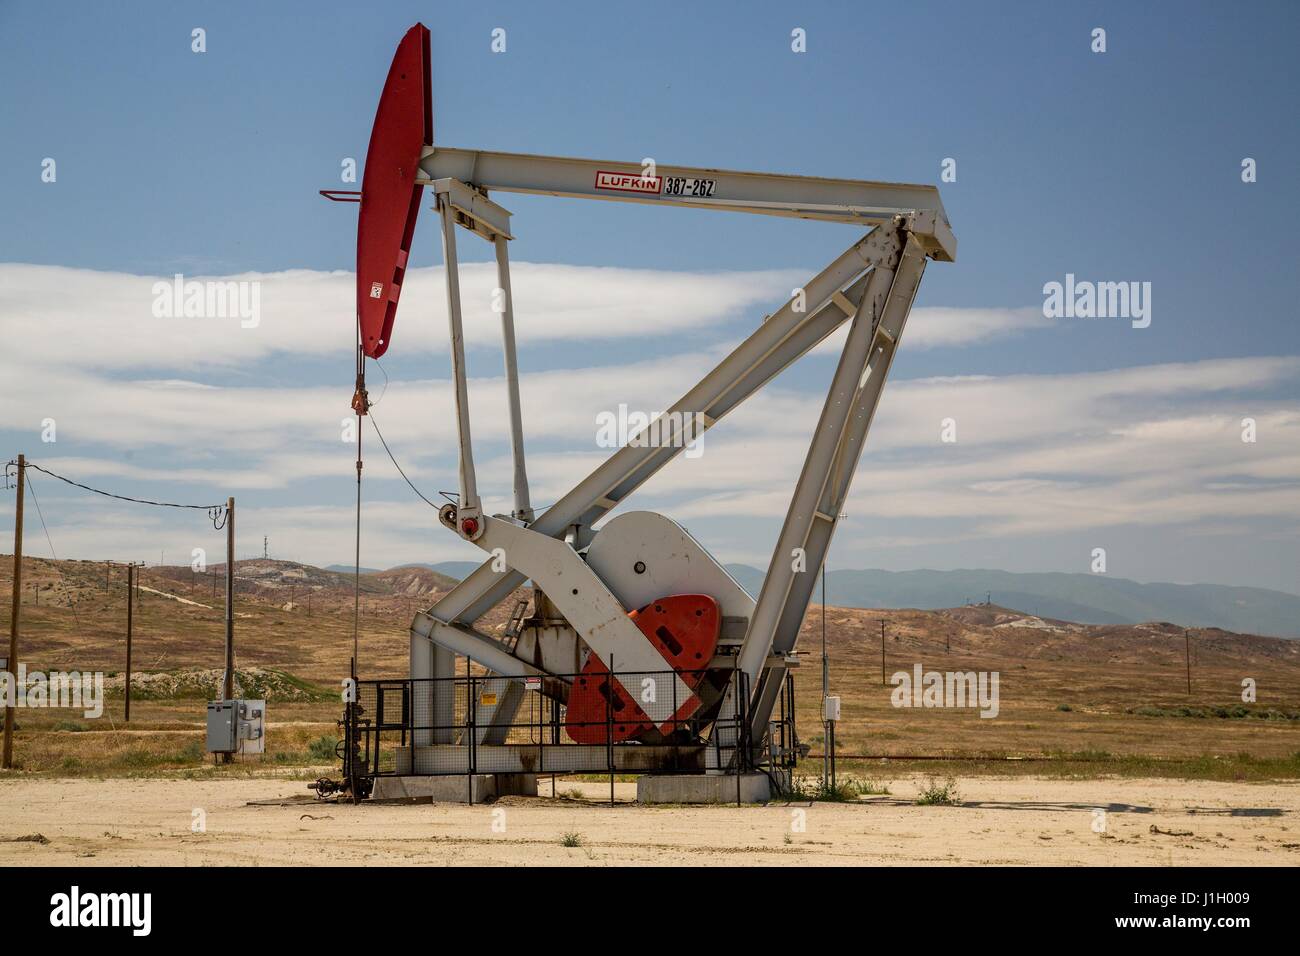 An crude oil pump jack working in the Kern River Oil Field along the San Joaquin Valley April 11, 2017 in Bakersfield, California. The oil and gas wells that cover the area are on public land leased by the federal Bureau of Land Management. Stock Photo